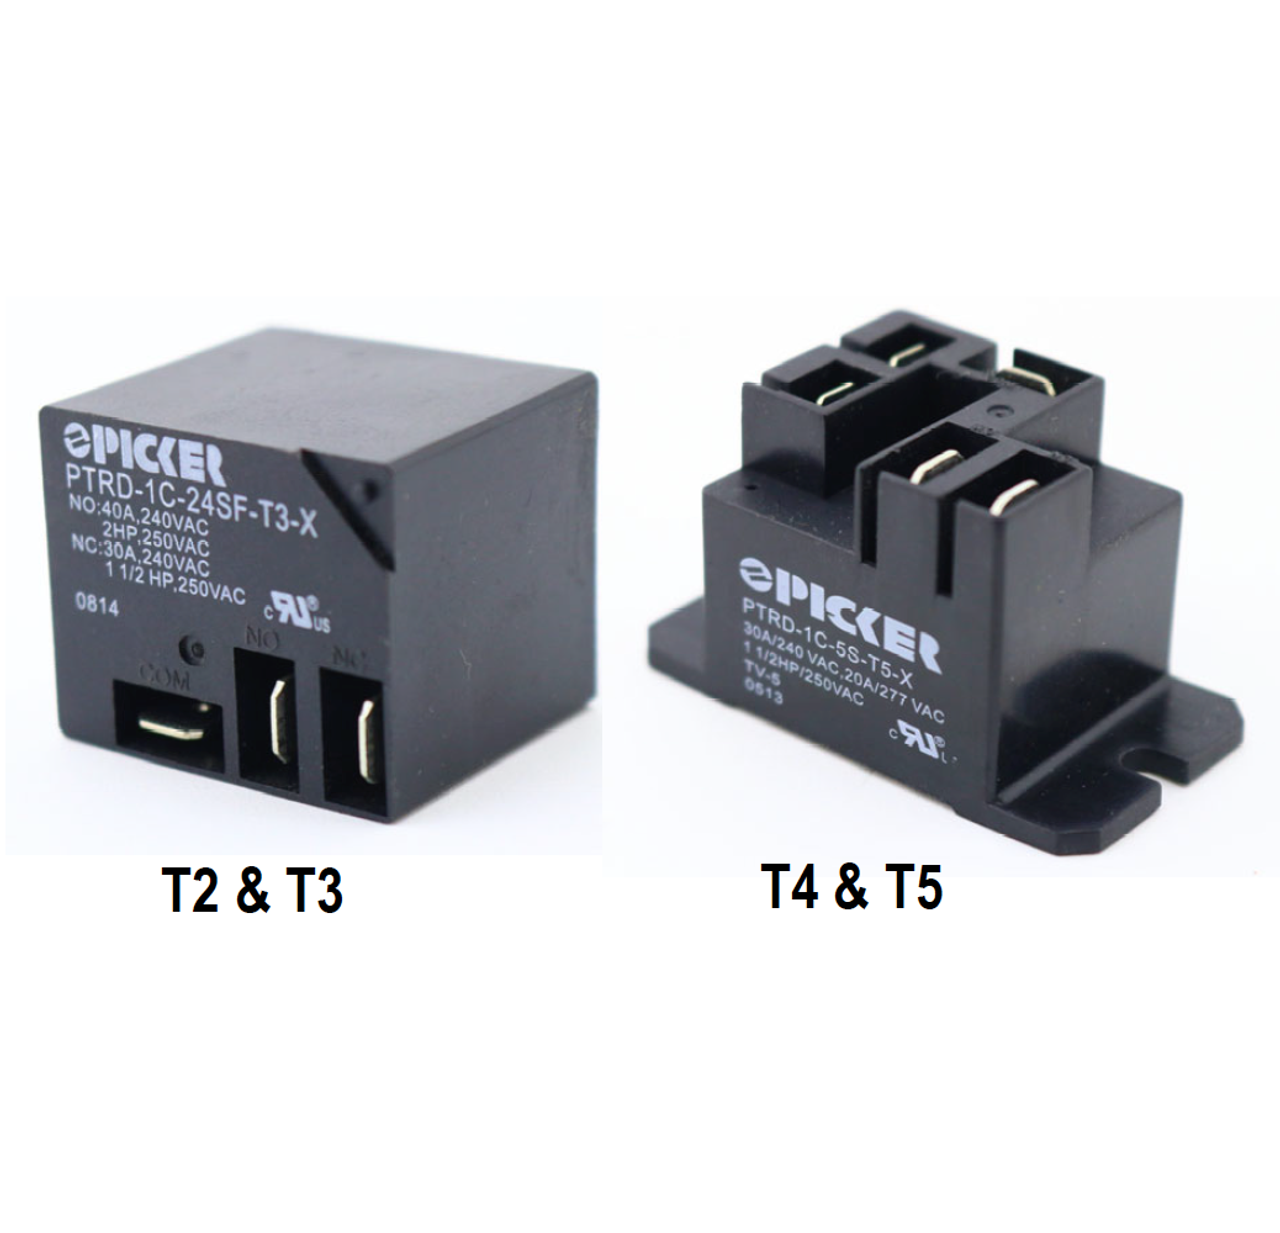 Picker PTRD-1A-18S-T4-X-A0.6G Power Relays